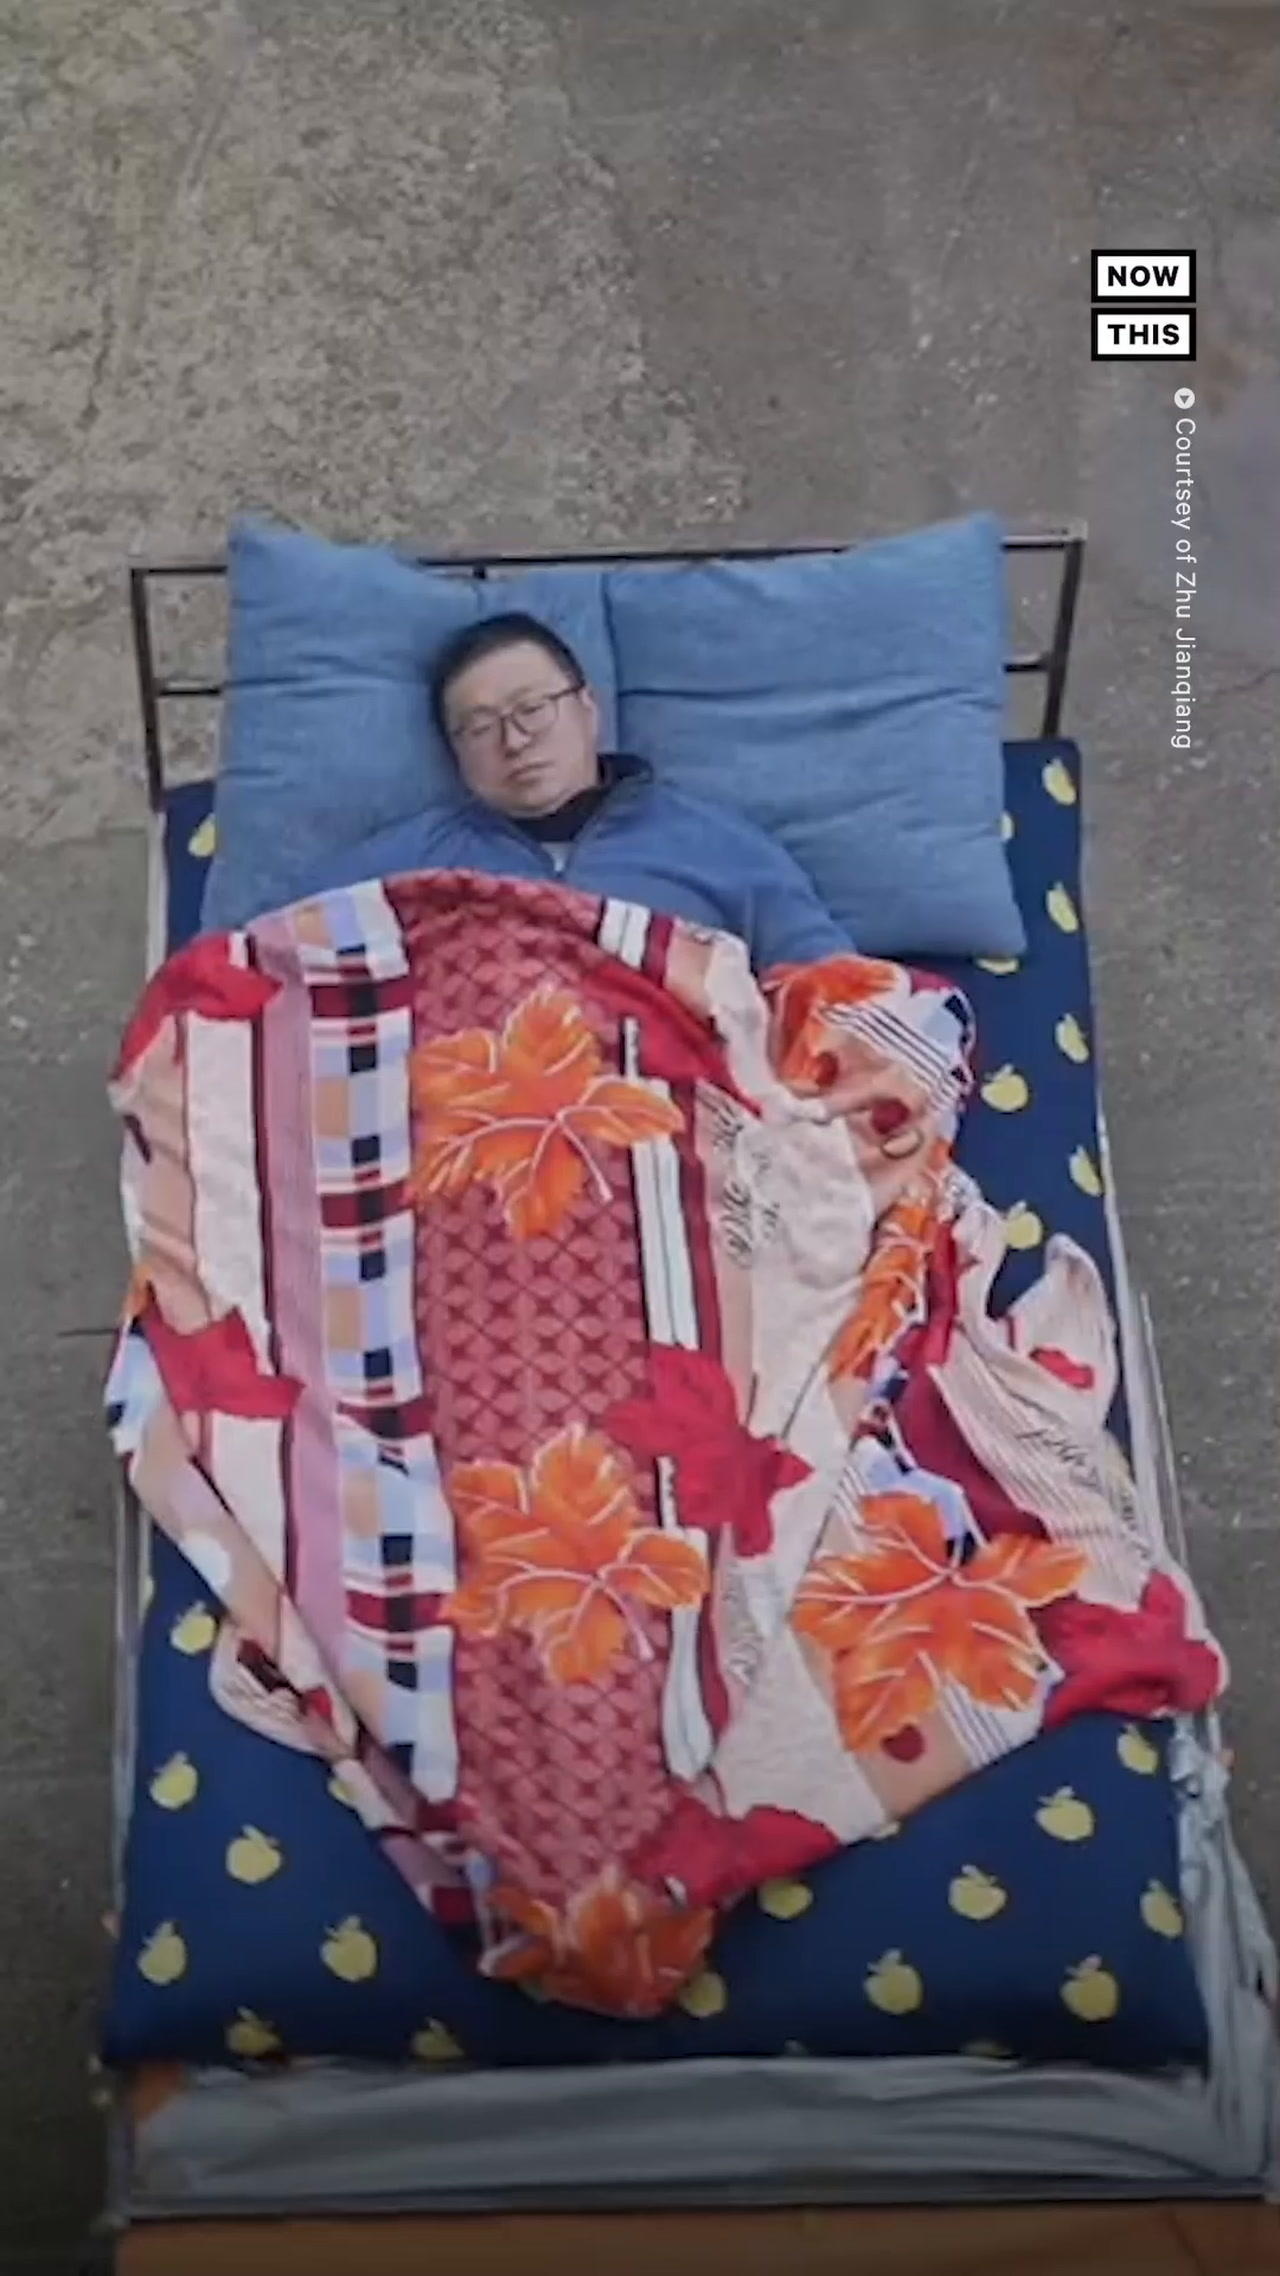 This Man Went Viral For Creating a Bed on Wheels